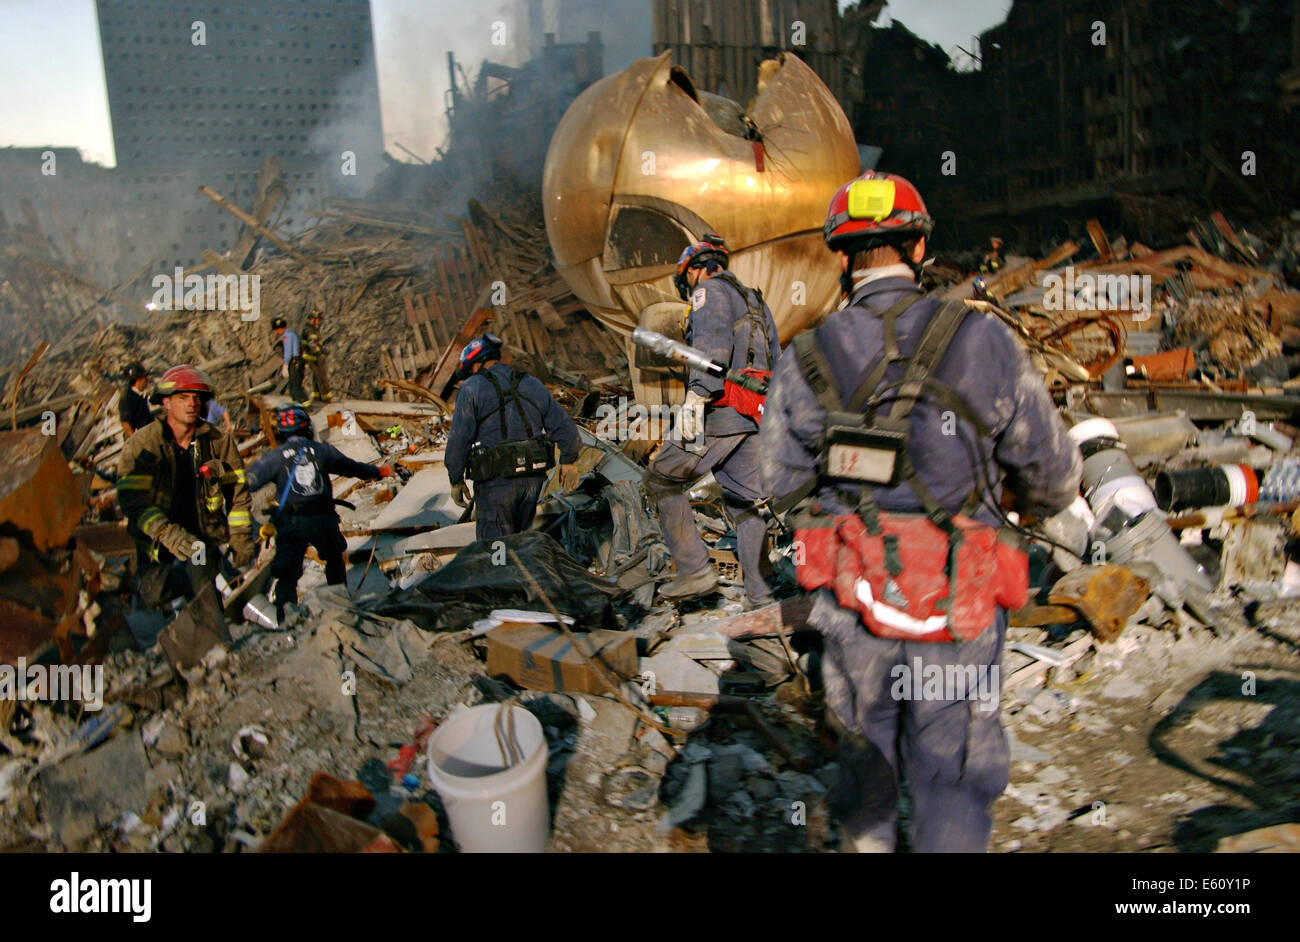 Rescue workers continue the recovery of victims amongst the wreckage of the World Trade Center in the aftermath of a massive terrorist attack which destroyed the twin towers killing 2,606 people September 16, 2001 in New York, NY. Stock Photo